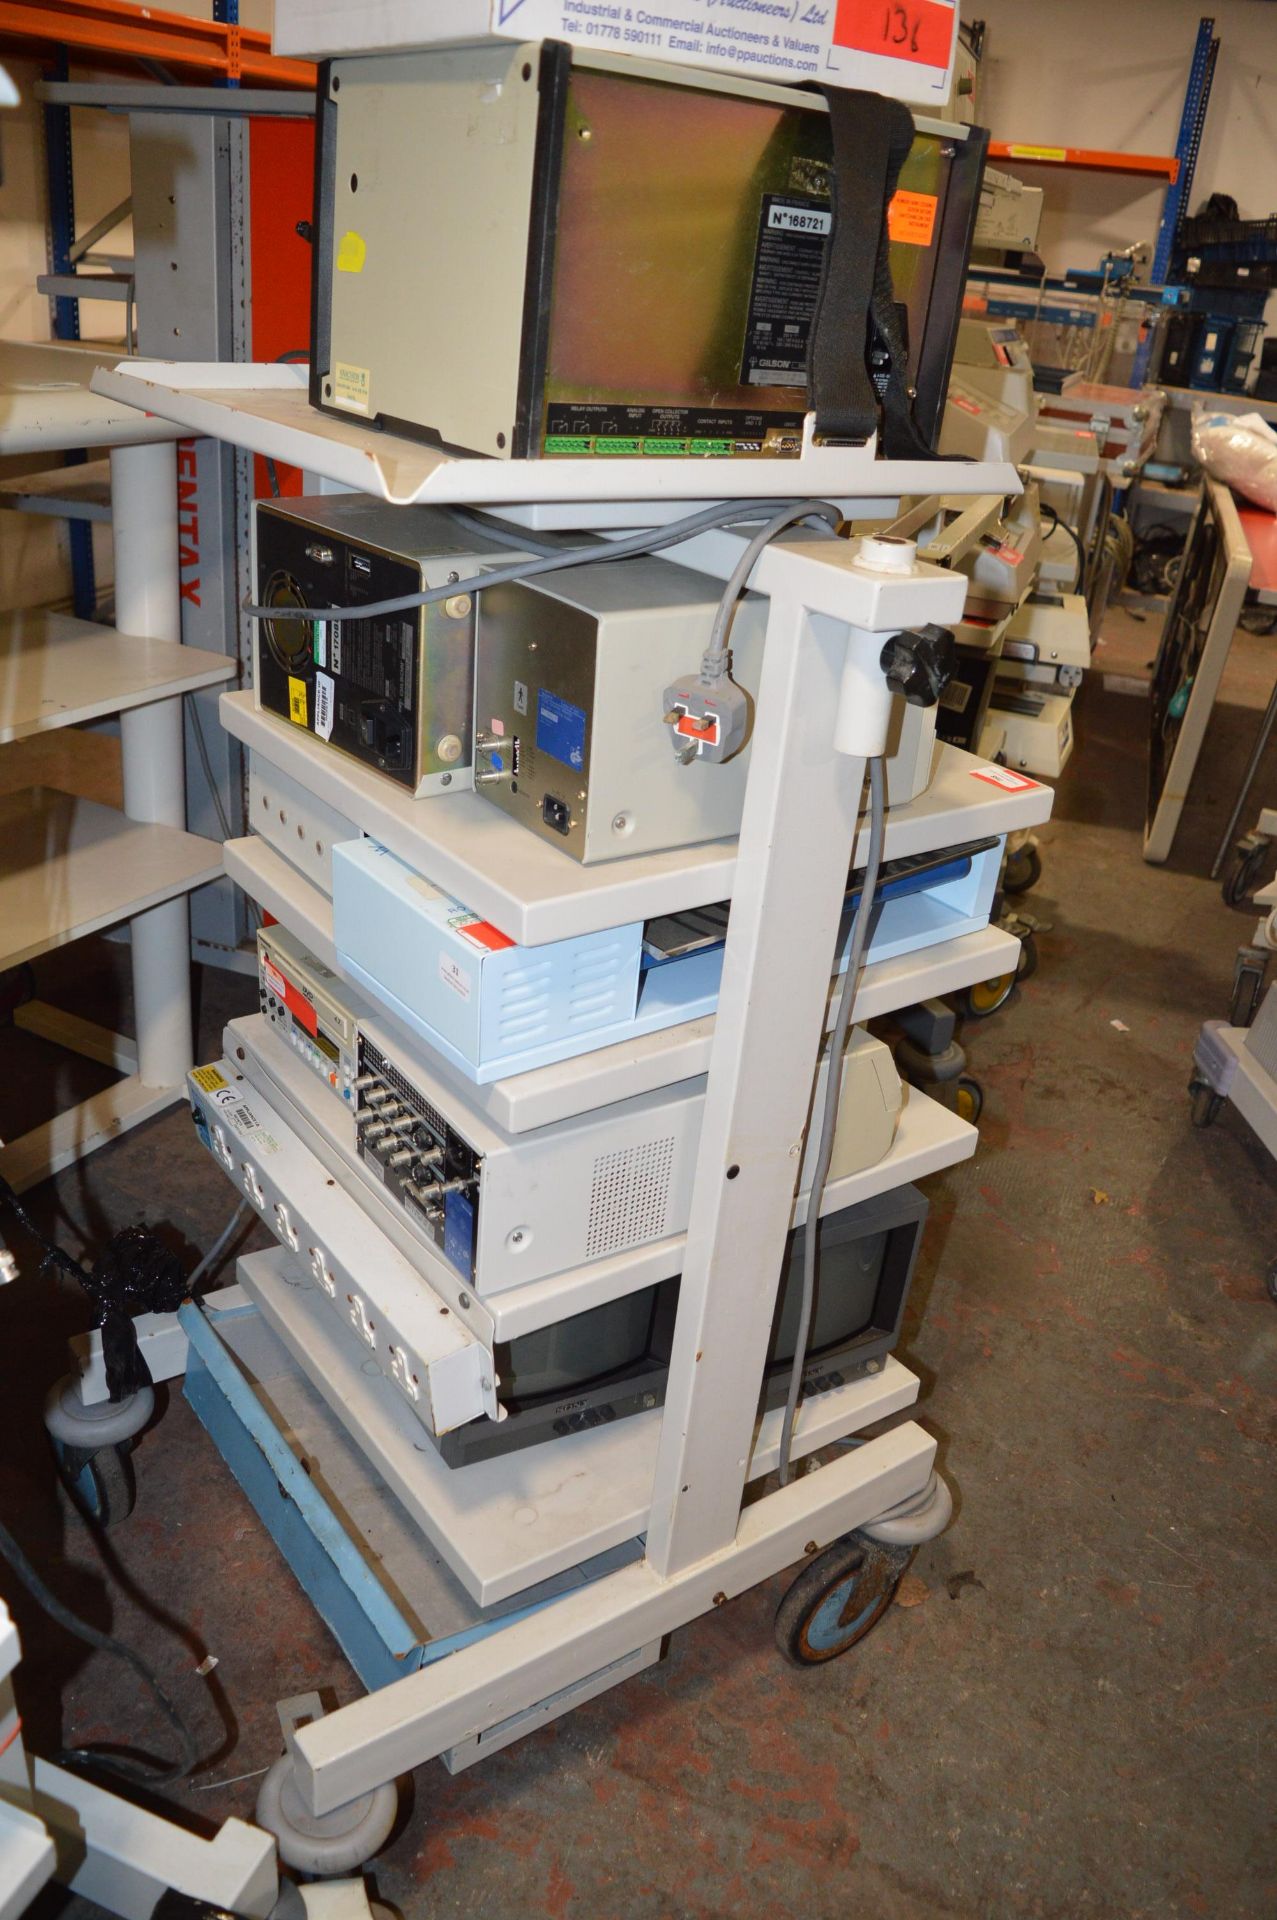 *Metal Trolley and Contents Including Monitors, Sampling Projector, etc. - Image 2 of 2